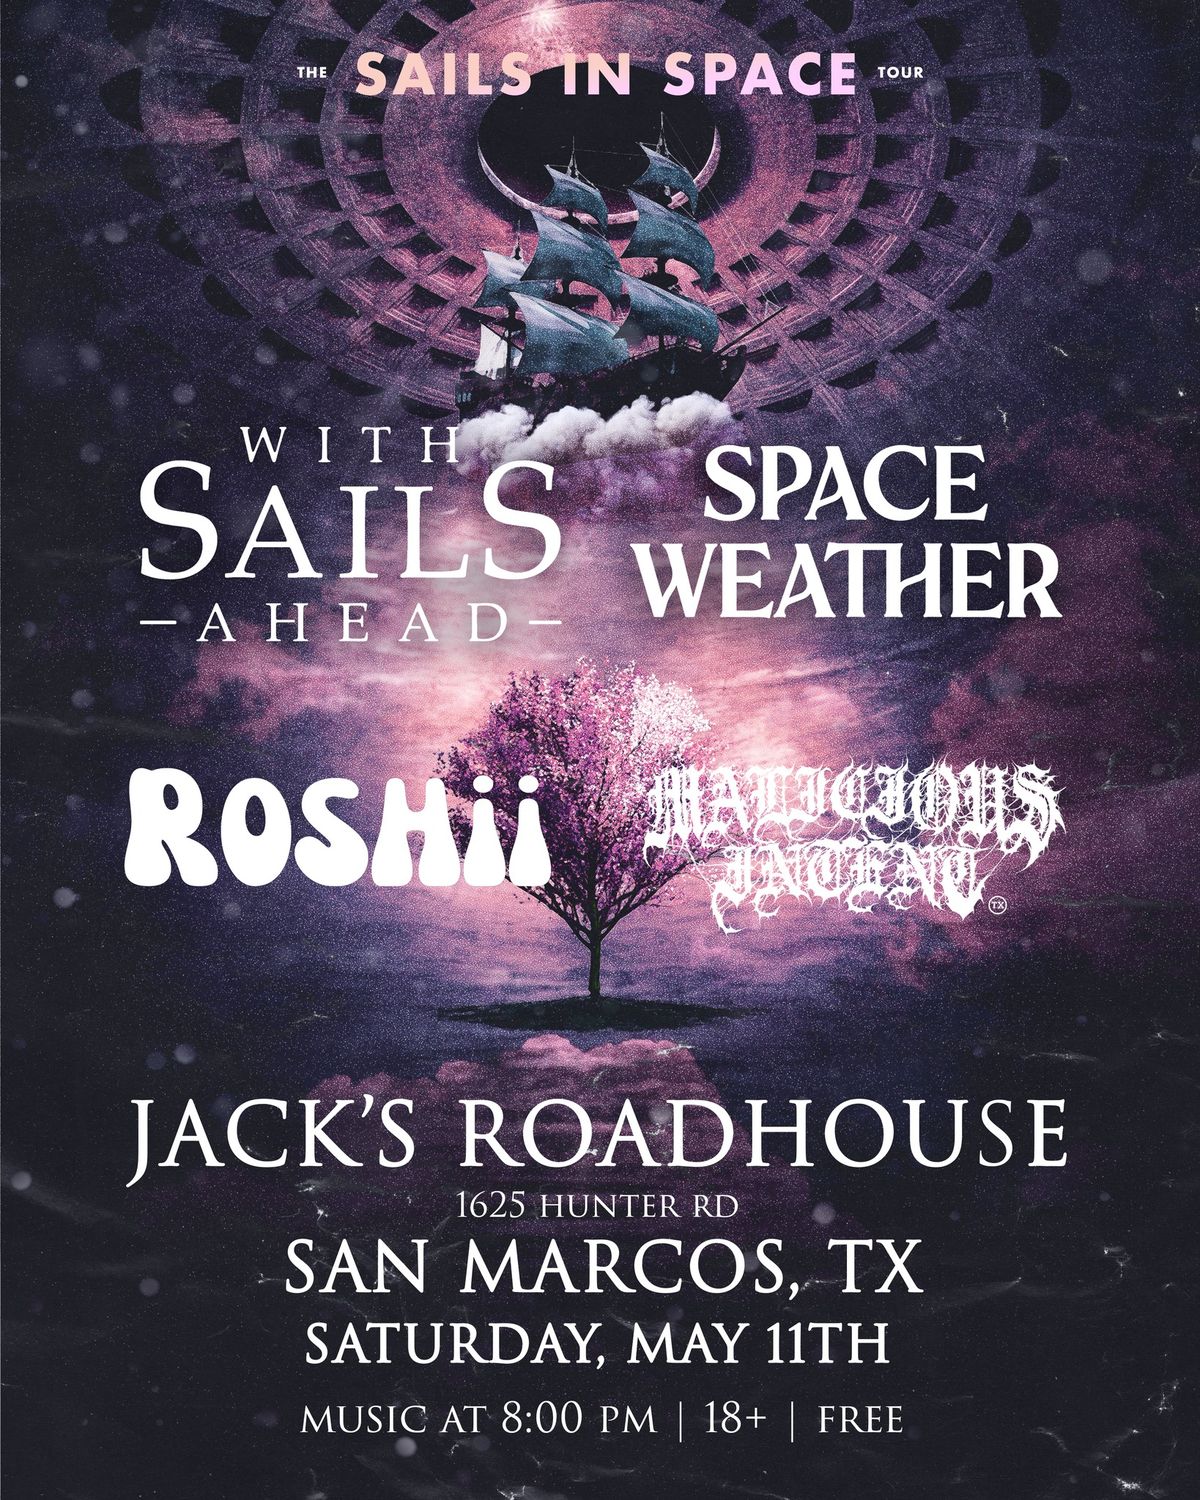 SAILS IN SPACE - SAN MARCOS